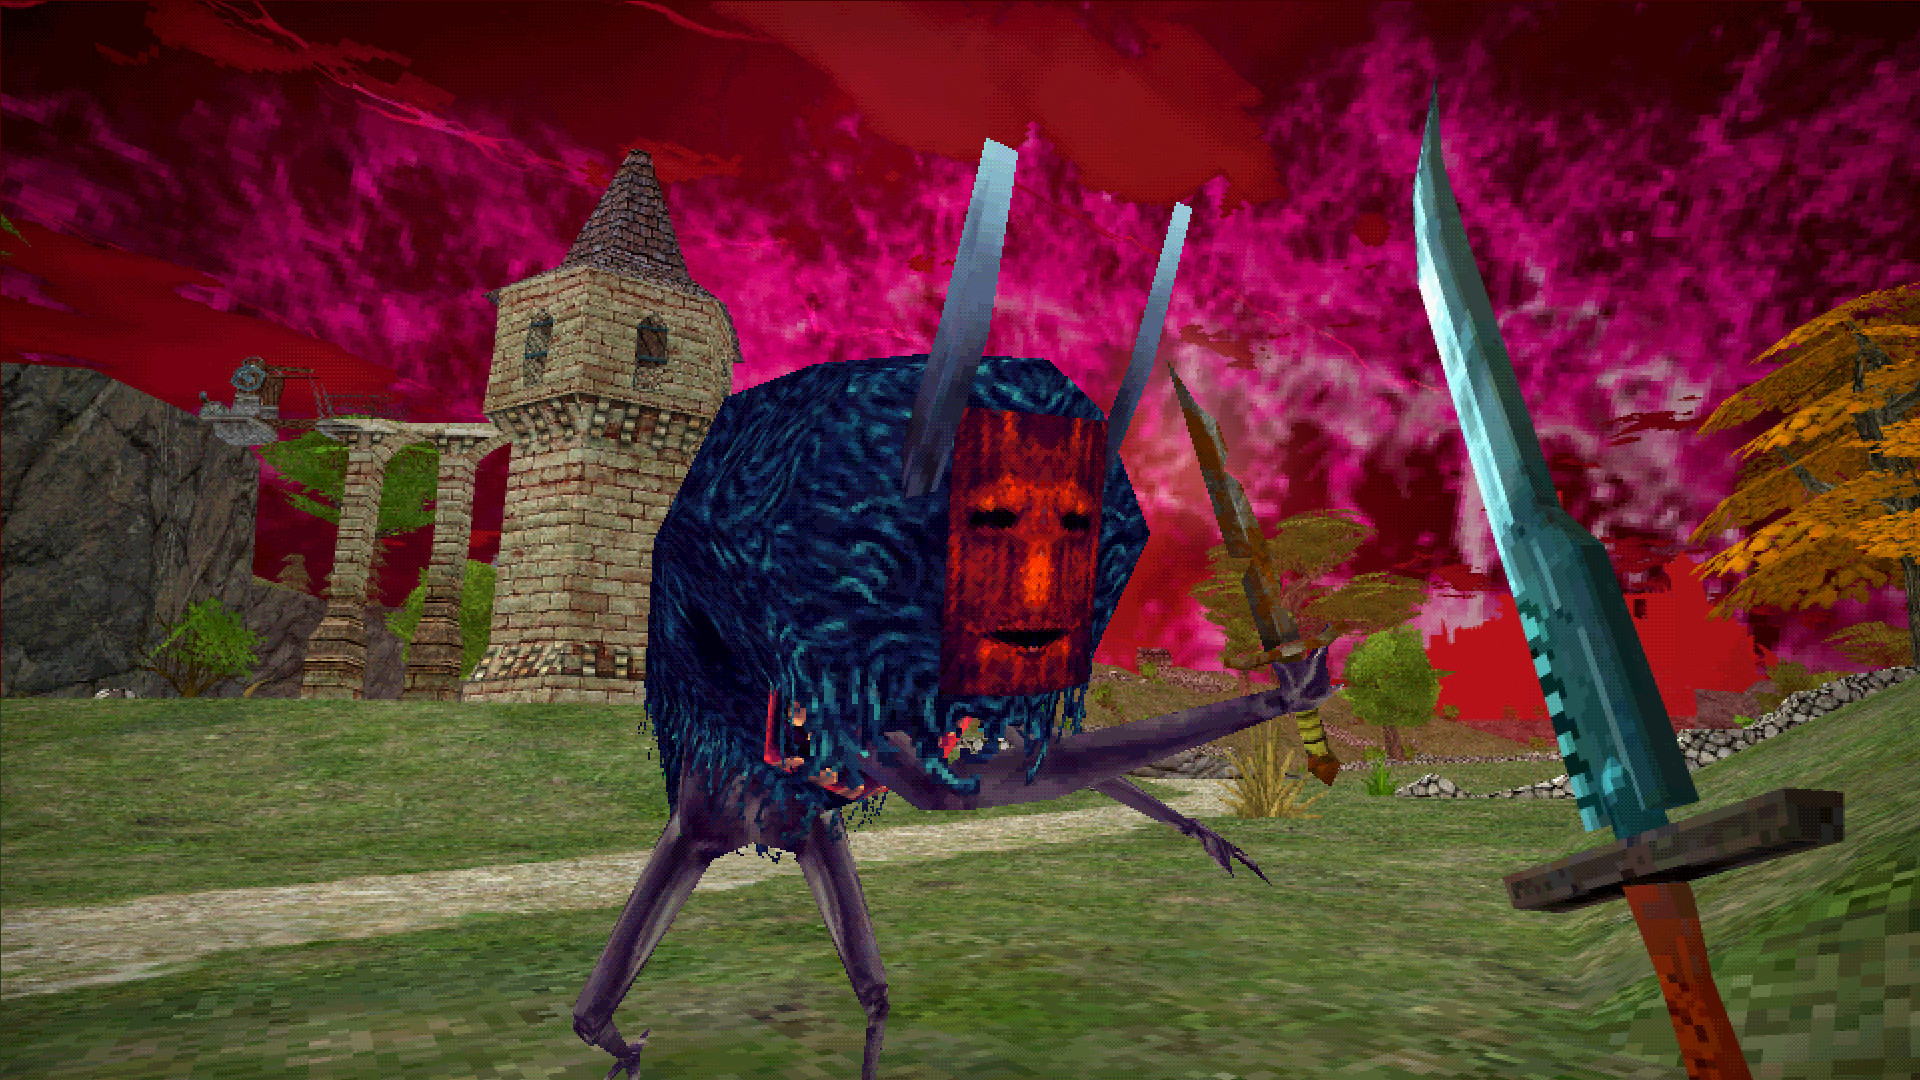 An image from RPG Dread Delusion. A red-masked creature with a body covered in black hair, with spindly arms and legs, attacks with a knife. It has a large toothy mouth in its stomach.